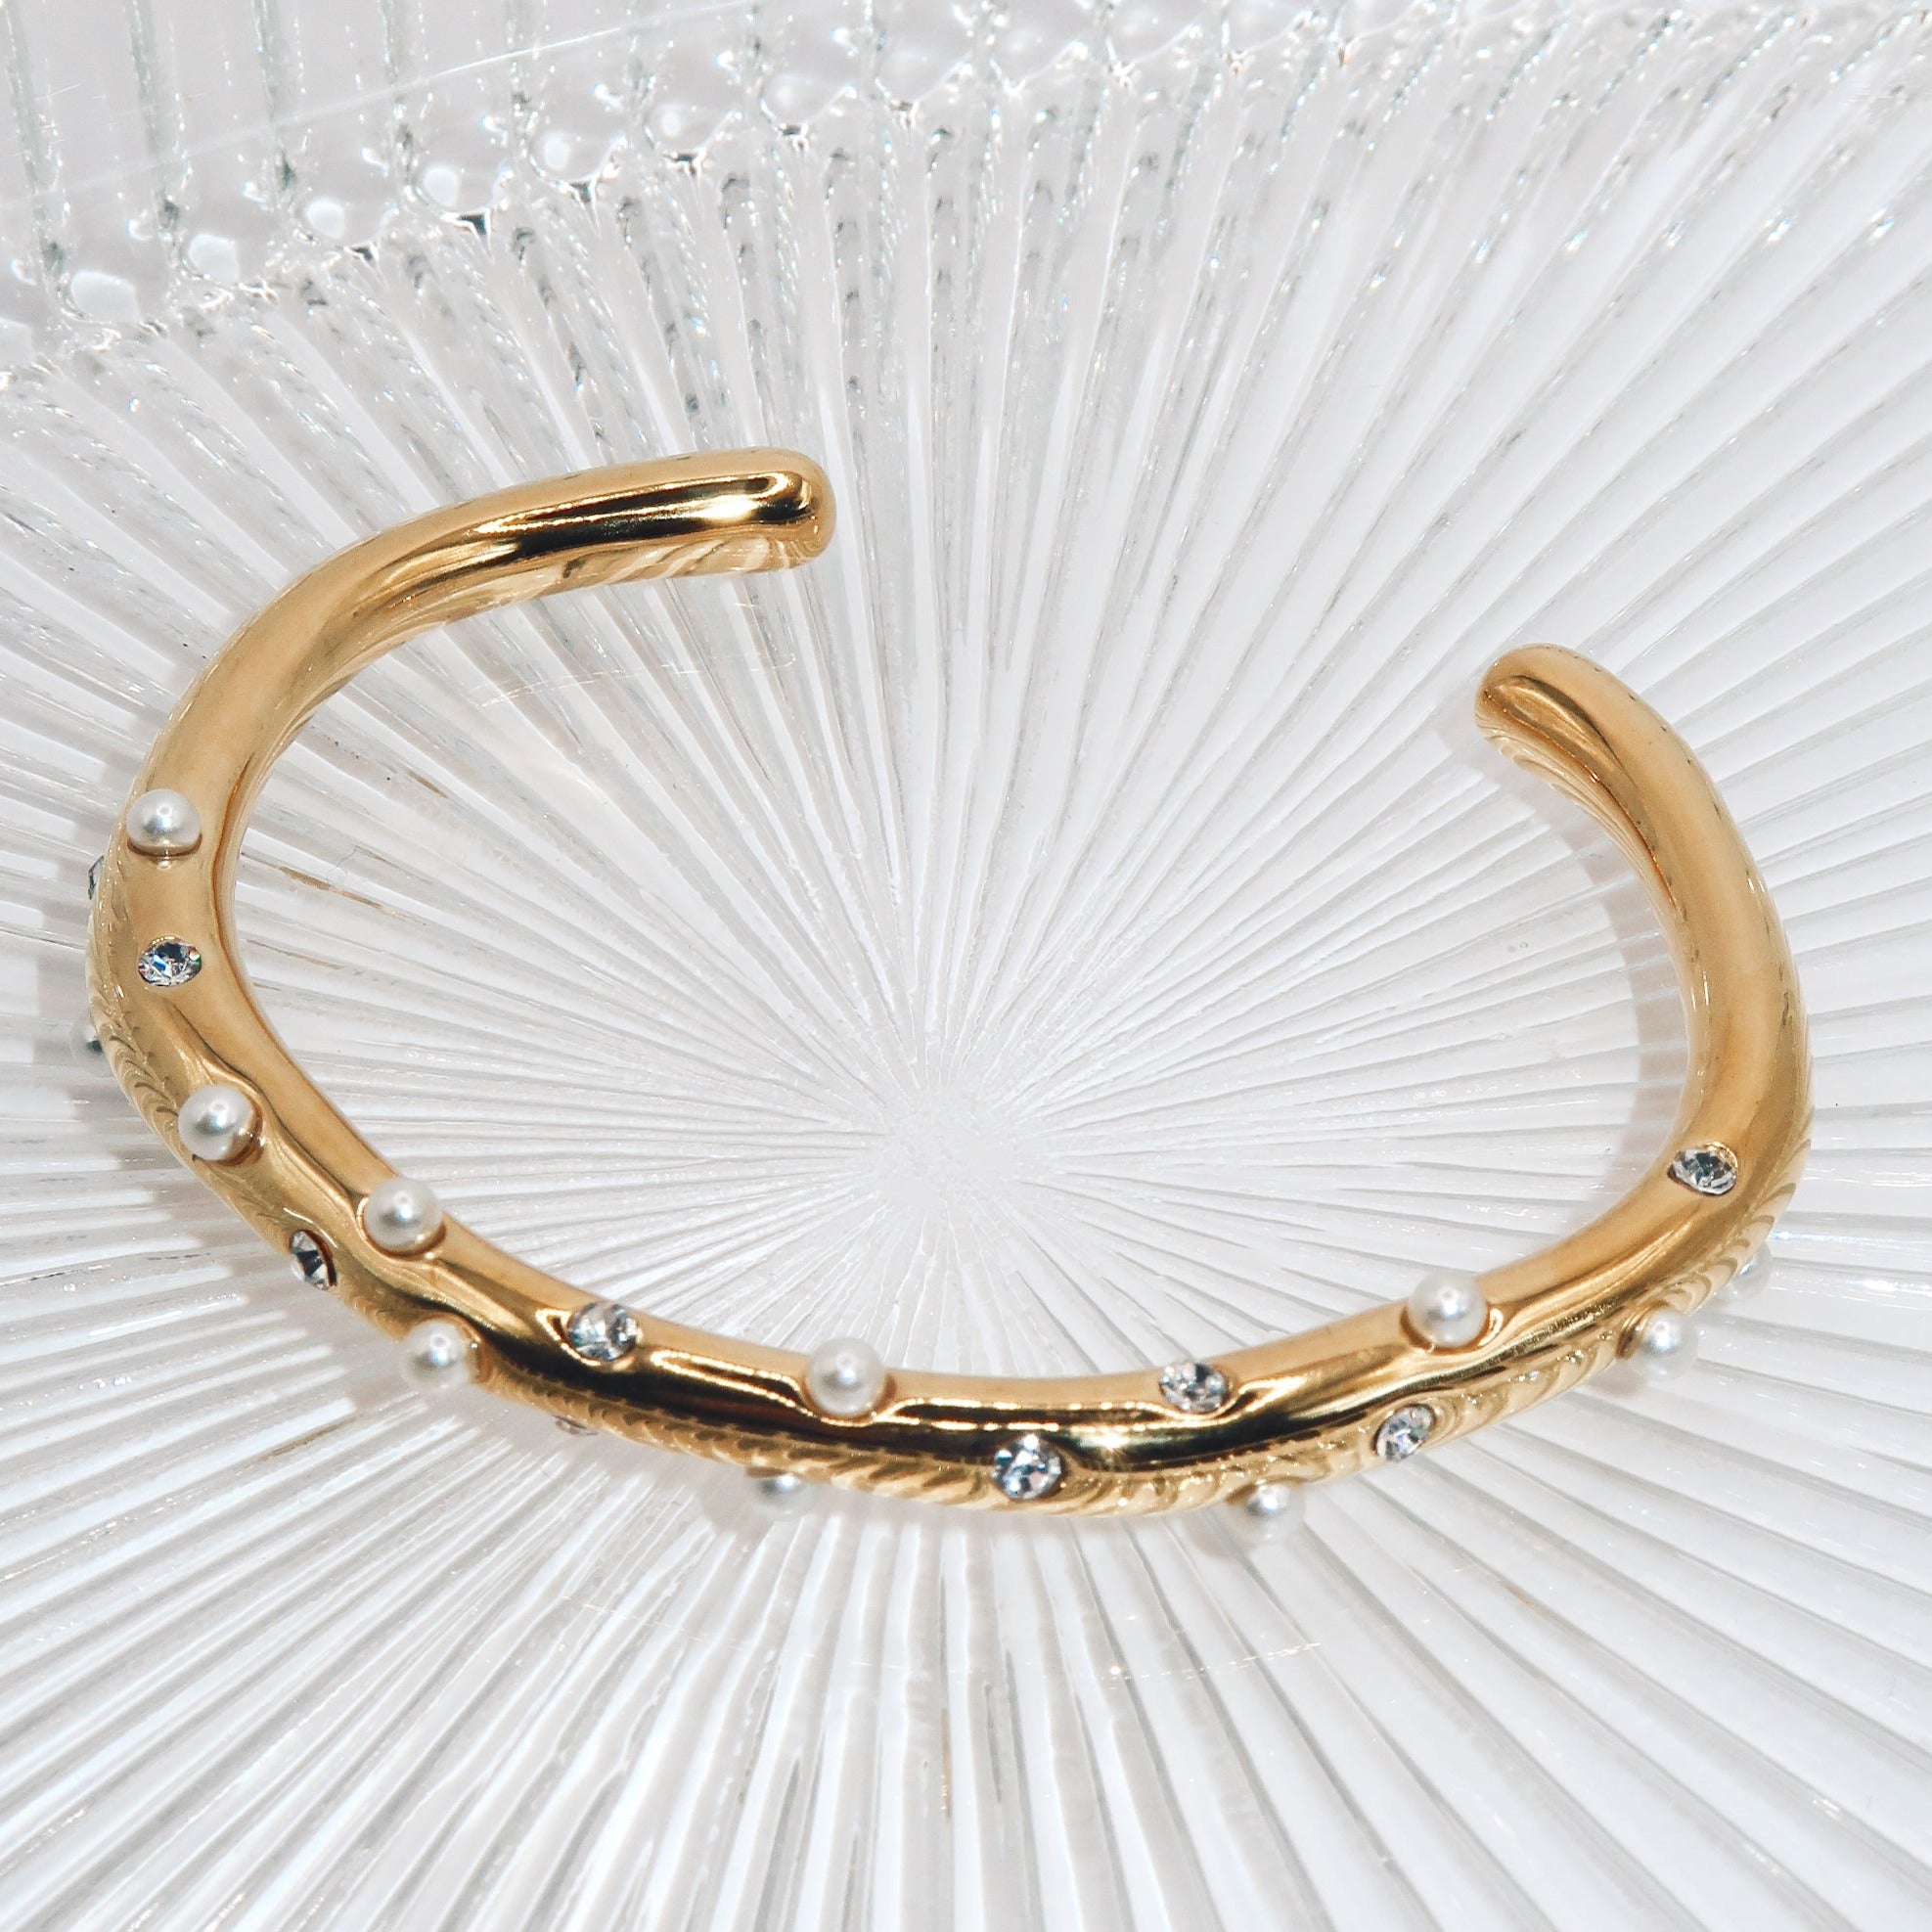 MILANO - 18K PVD Gold Plated CZ Stones and Freshwater Pearl Detail Cuff Bracelet - Mixed Metals